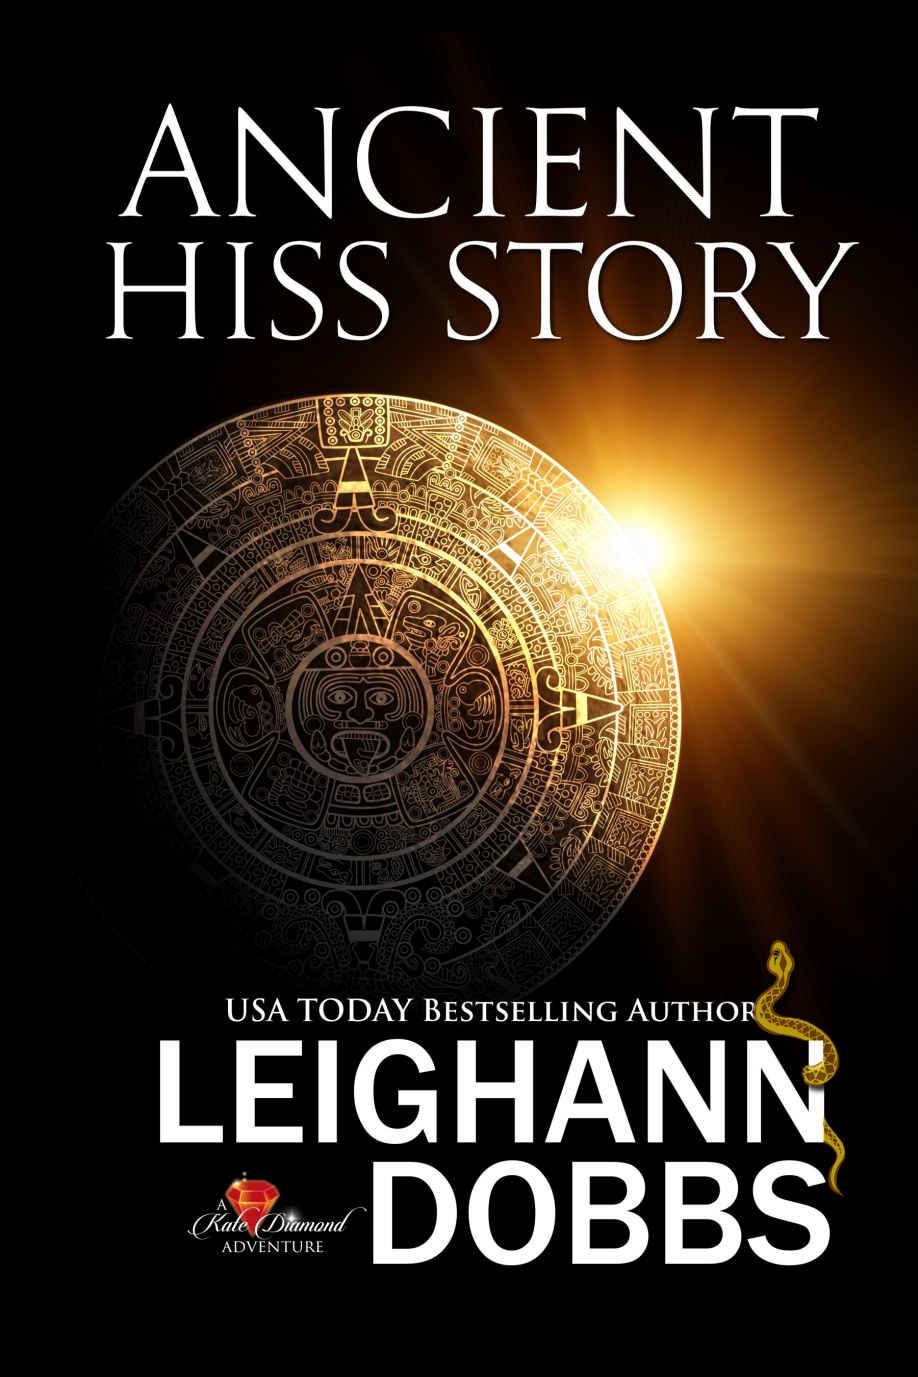 Ancient Hiss Story by Leighann Dobbs